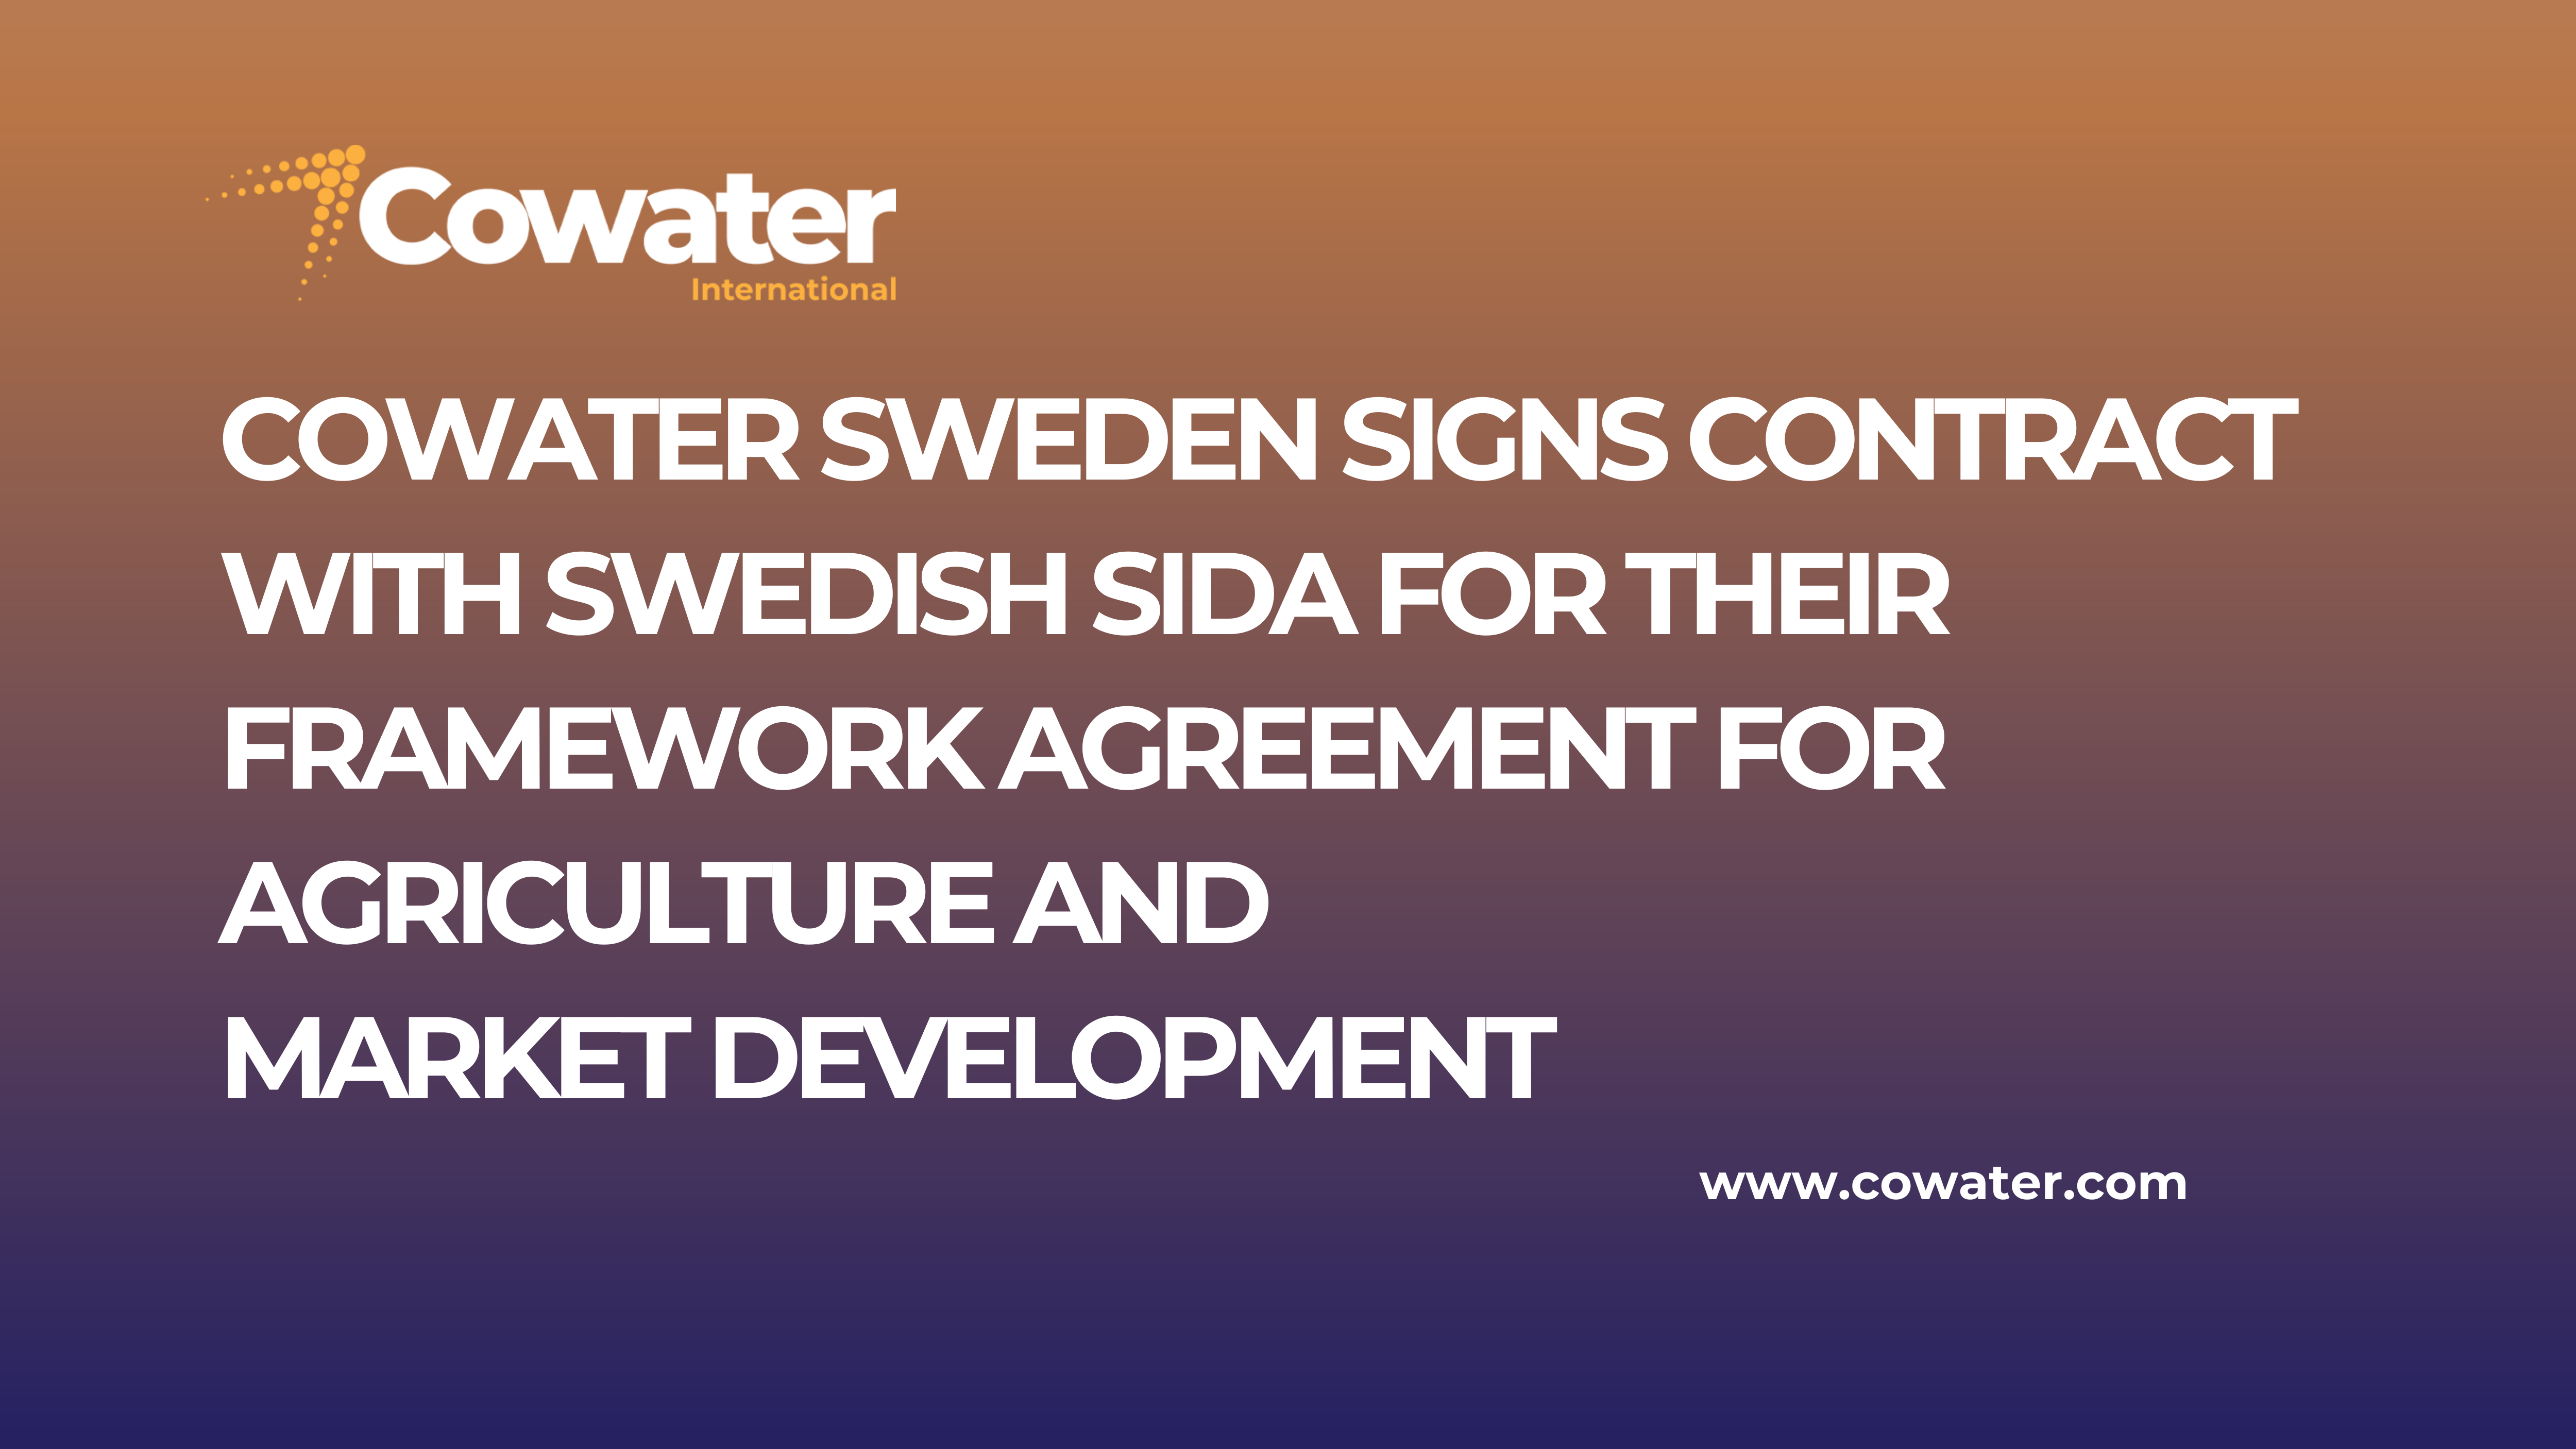 Cowater Sweden signs contract with Swedish Sida for their Framework Agreement for Agriculture and Market Development